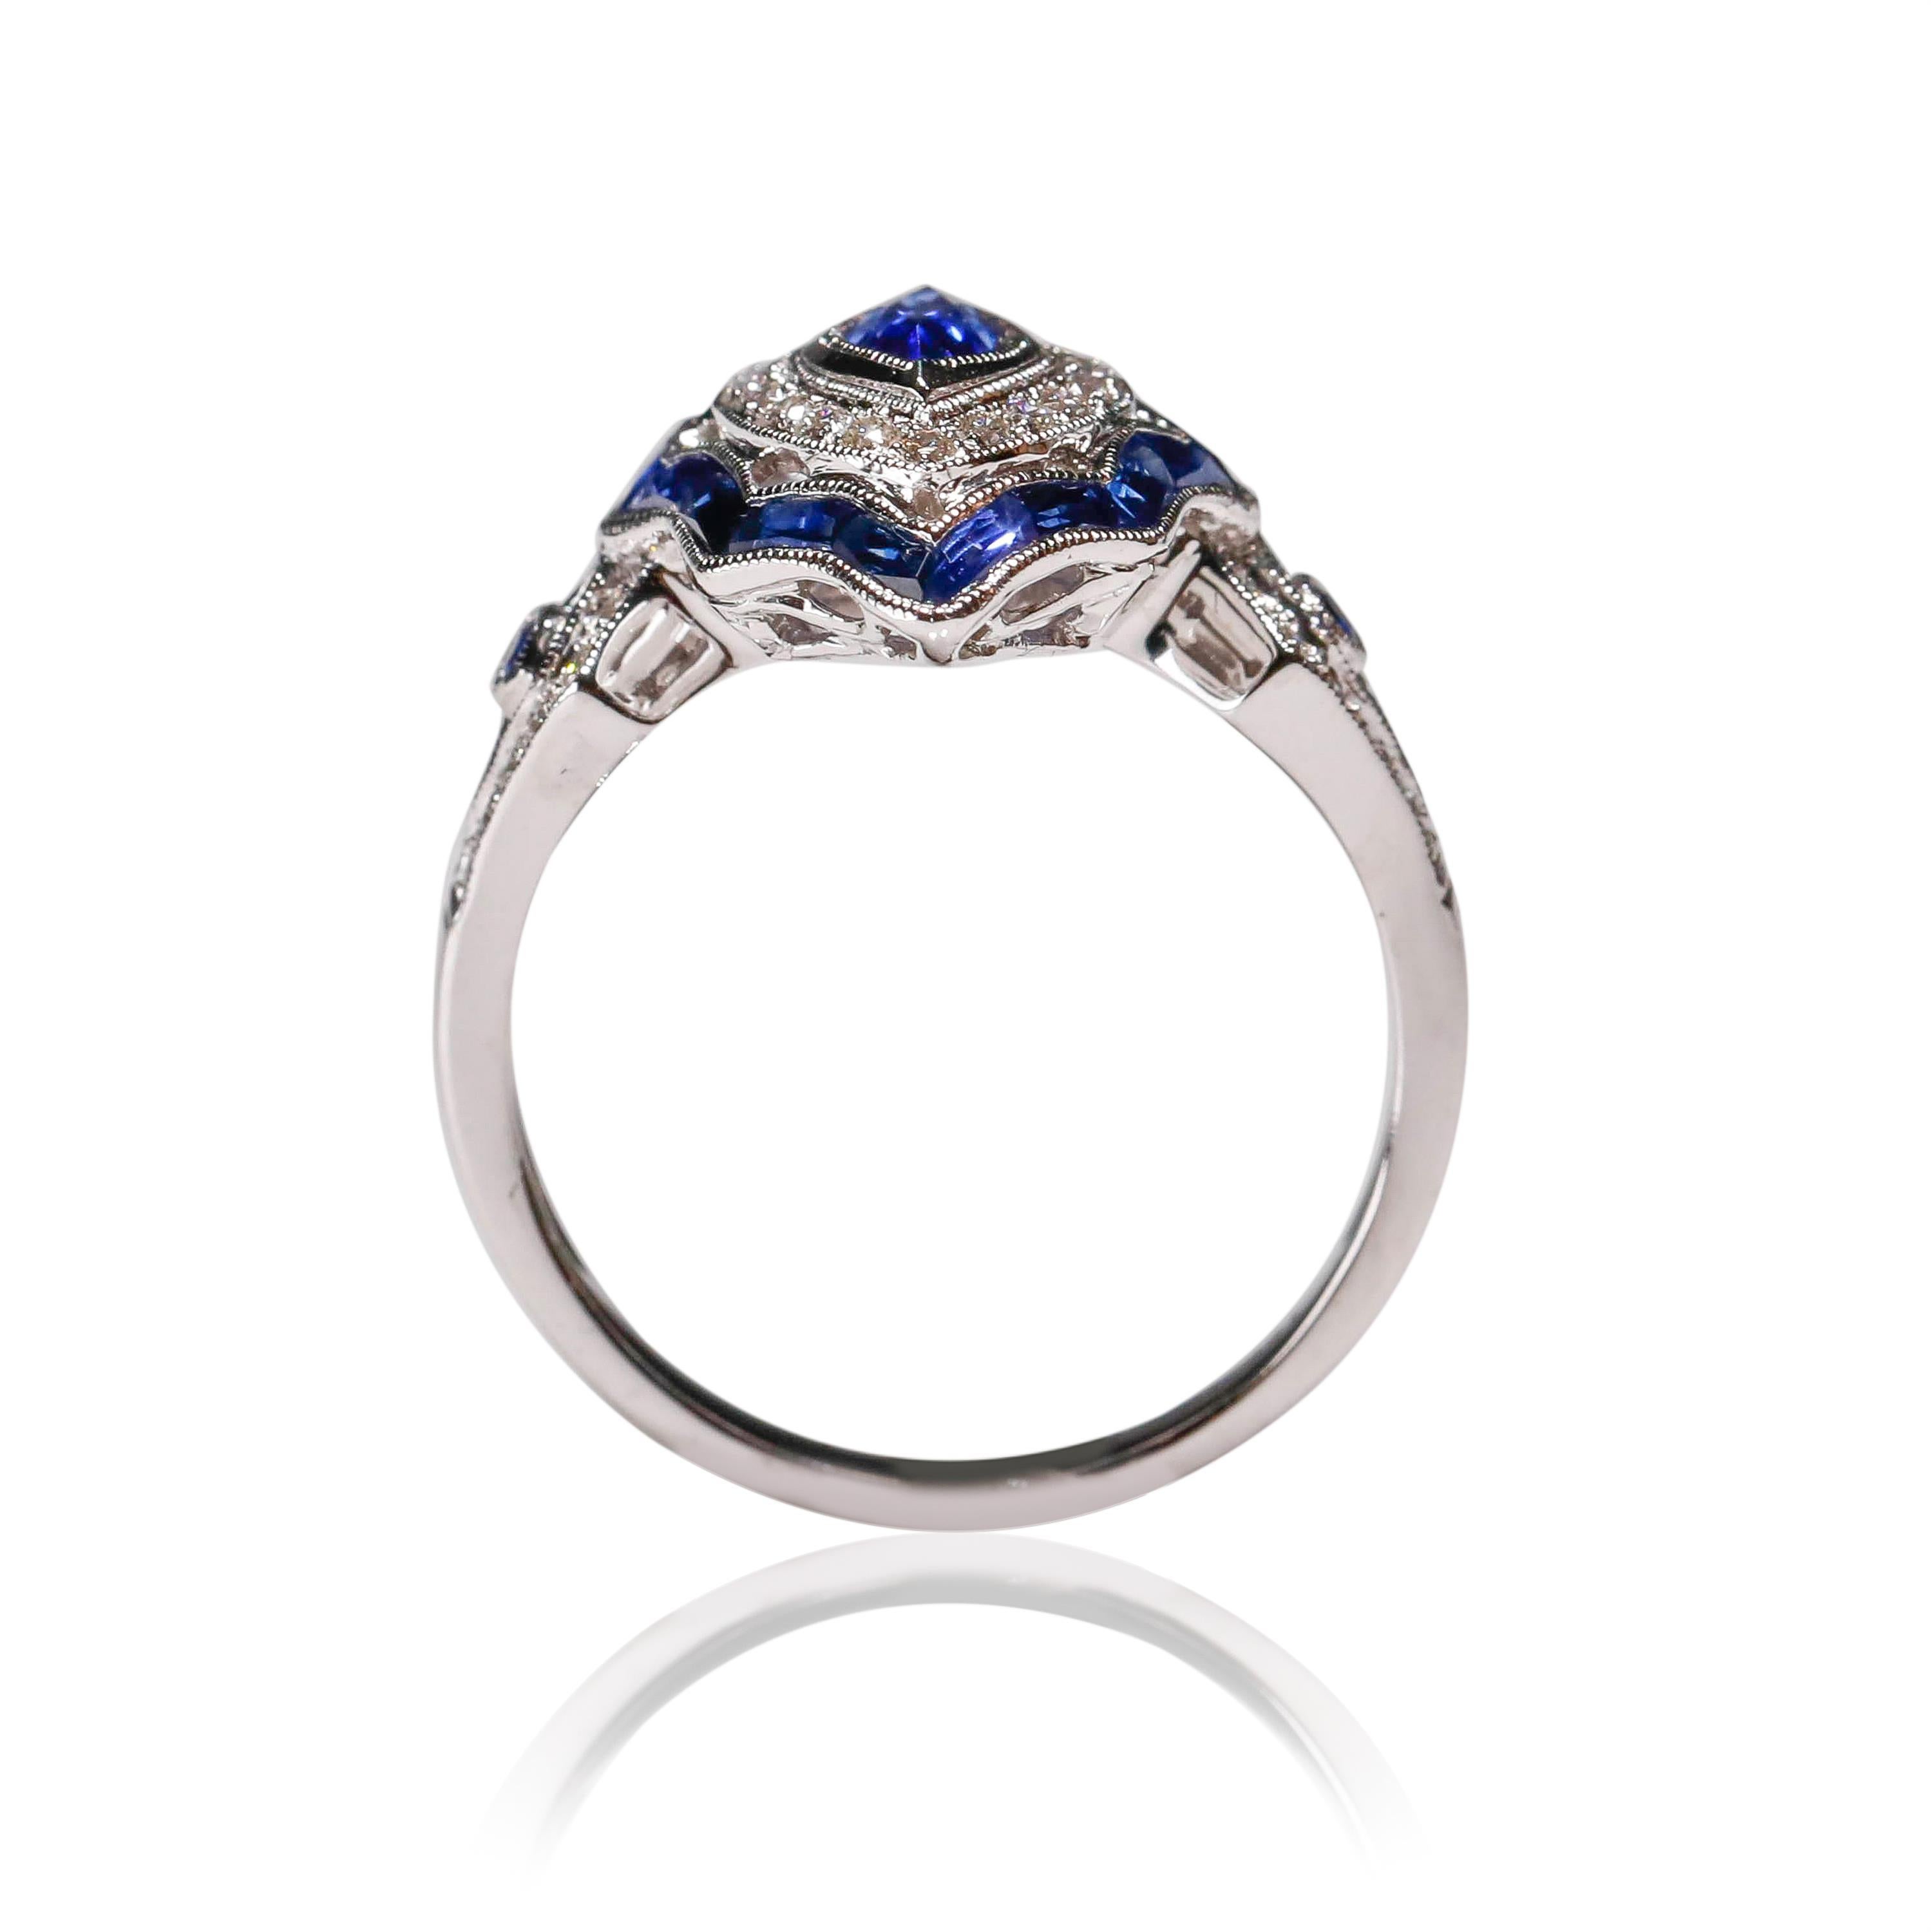 1.4 Carat Marquise-Cut Blue Sapphire Diamond Engagement Ring 18 Karat White Gold

She will be just overwhelmed with emotions when she sees this estate ring. 1.4 TCW Marquise cut blue sapphire is centered on top of the ring, embraced by a frame of